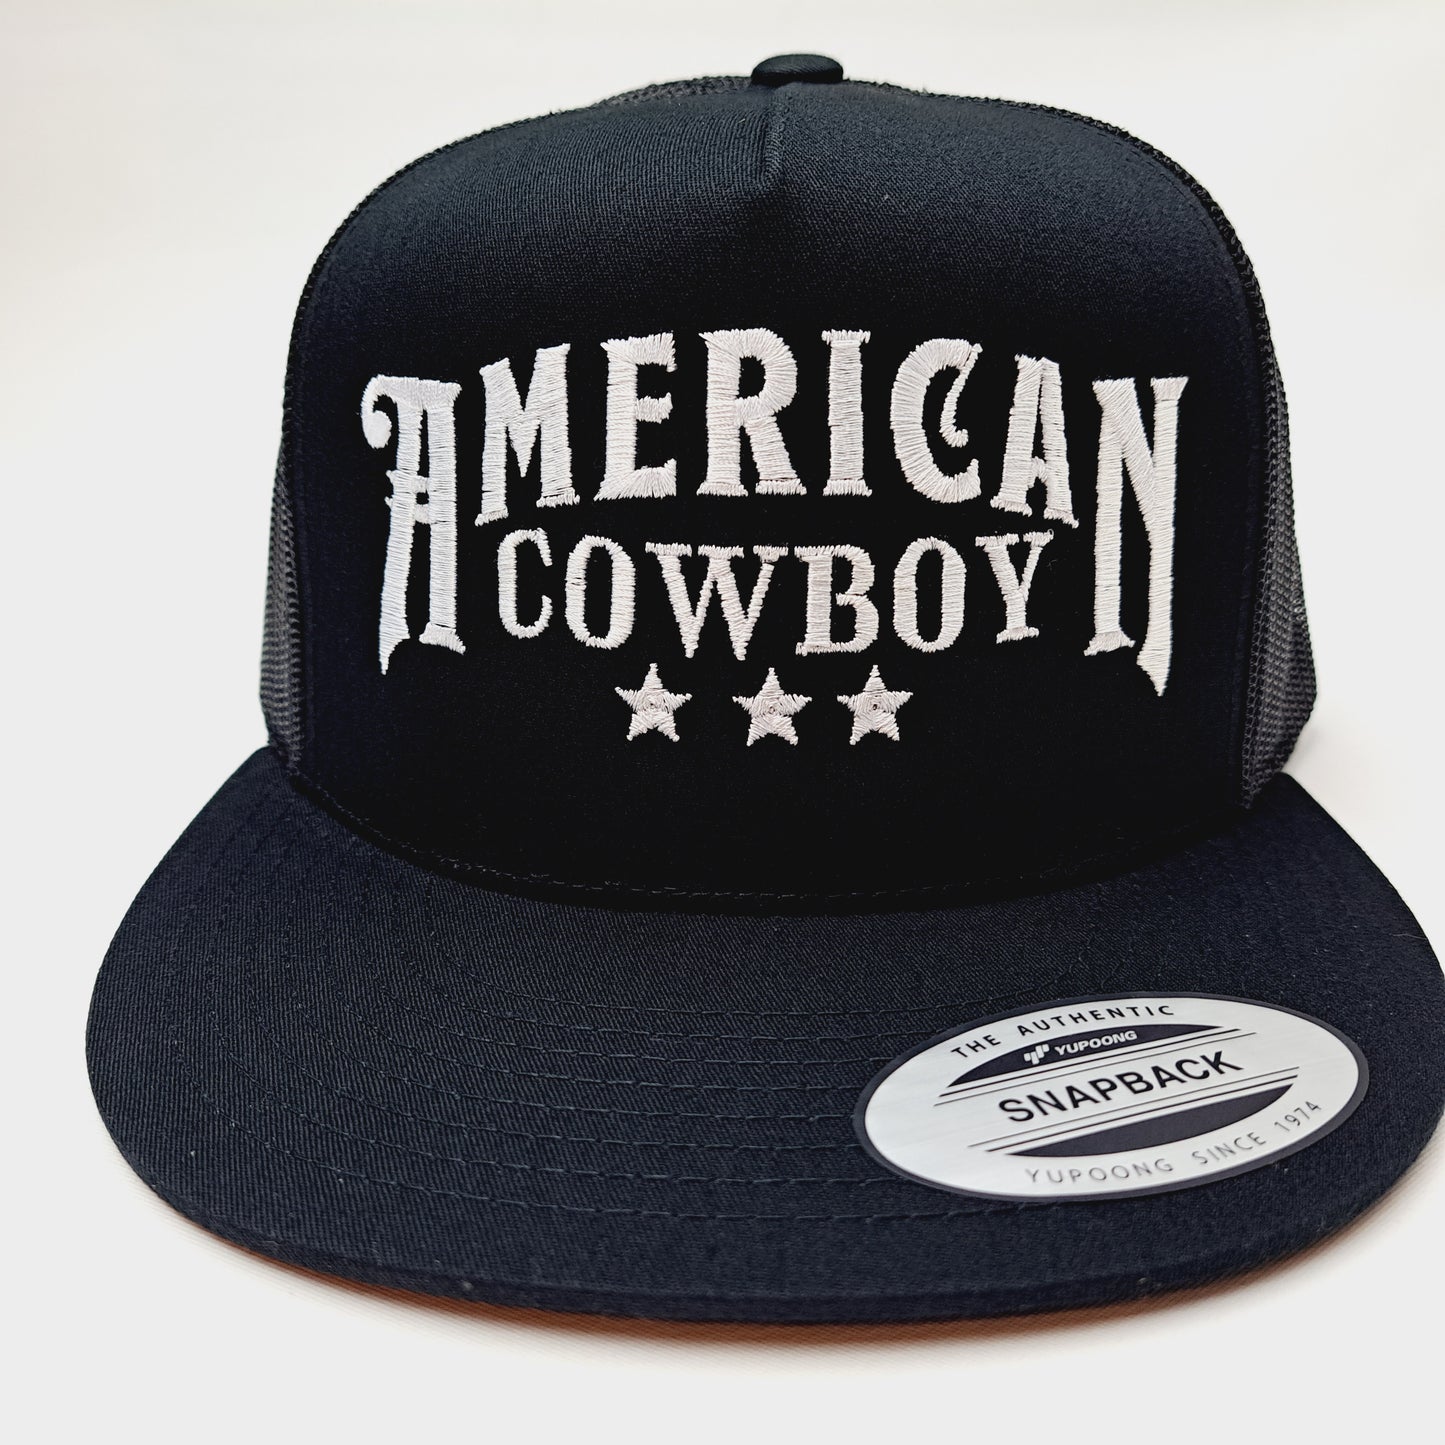 American Cowboy Embroidered Patch Flat Bill Snapback Mesh Hat Cap Yupoong